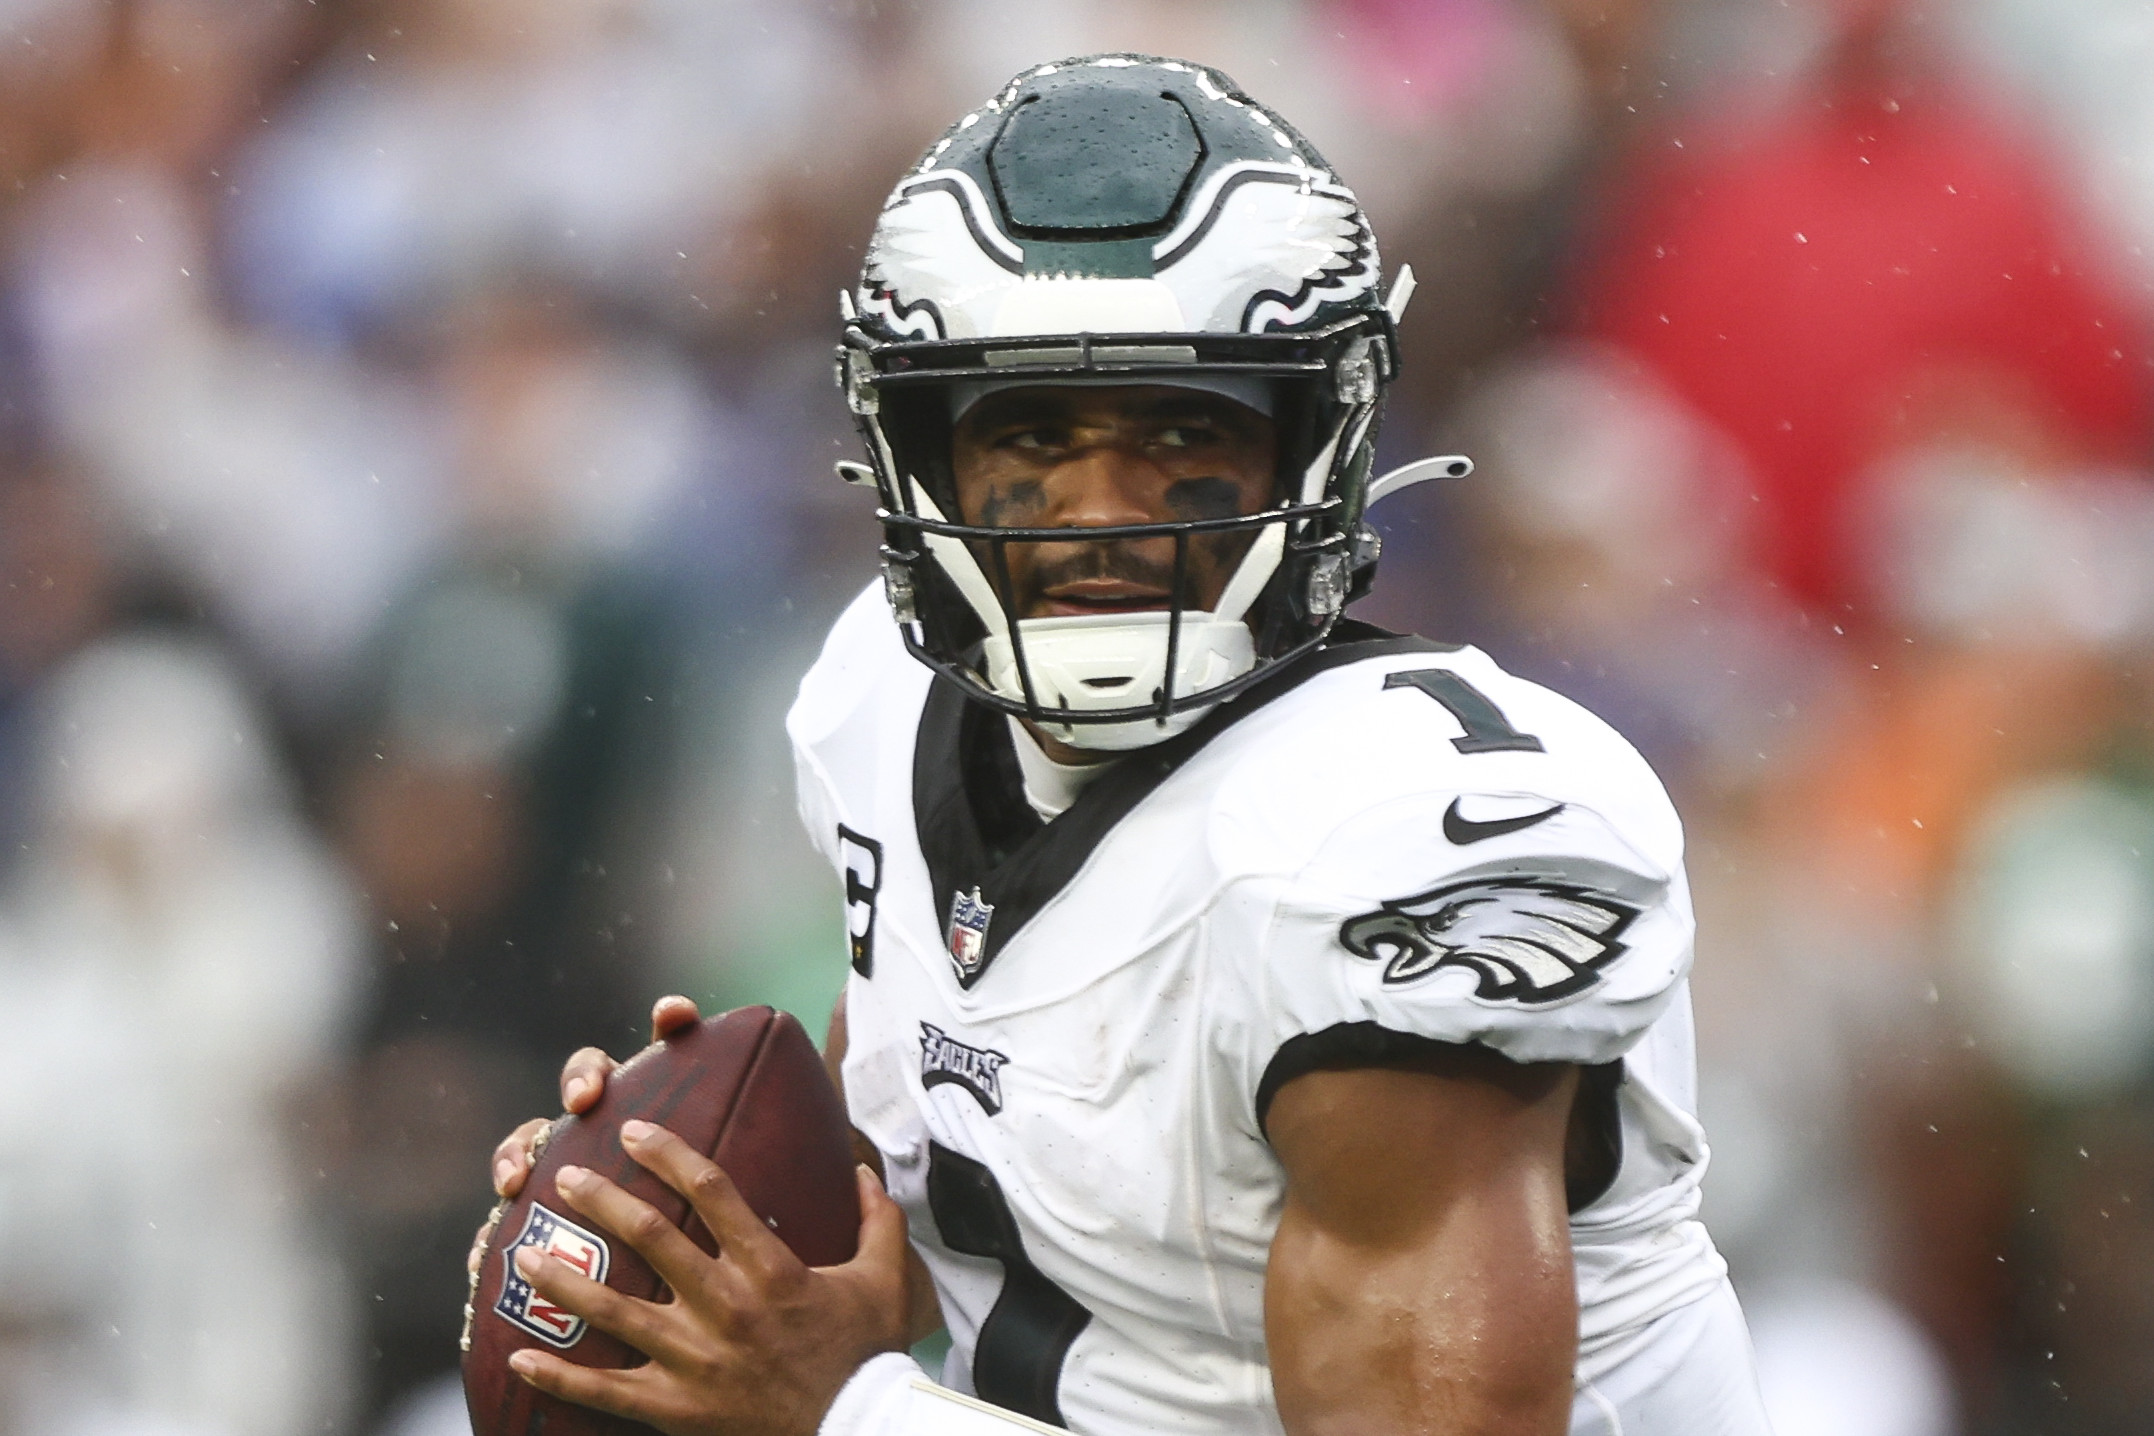 AP source: Hurts, Eagles agree to 5-year, $255M extension